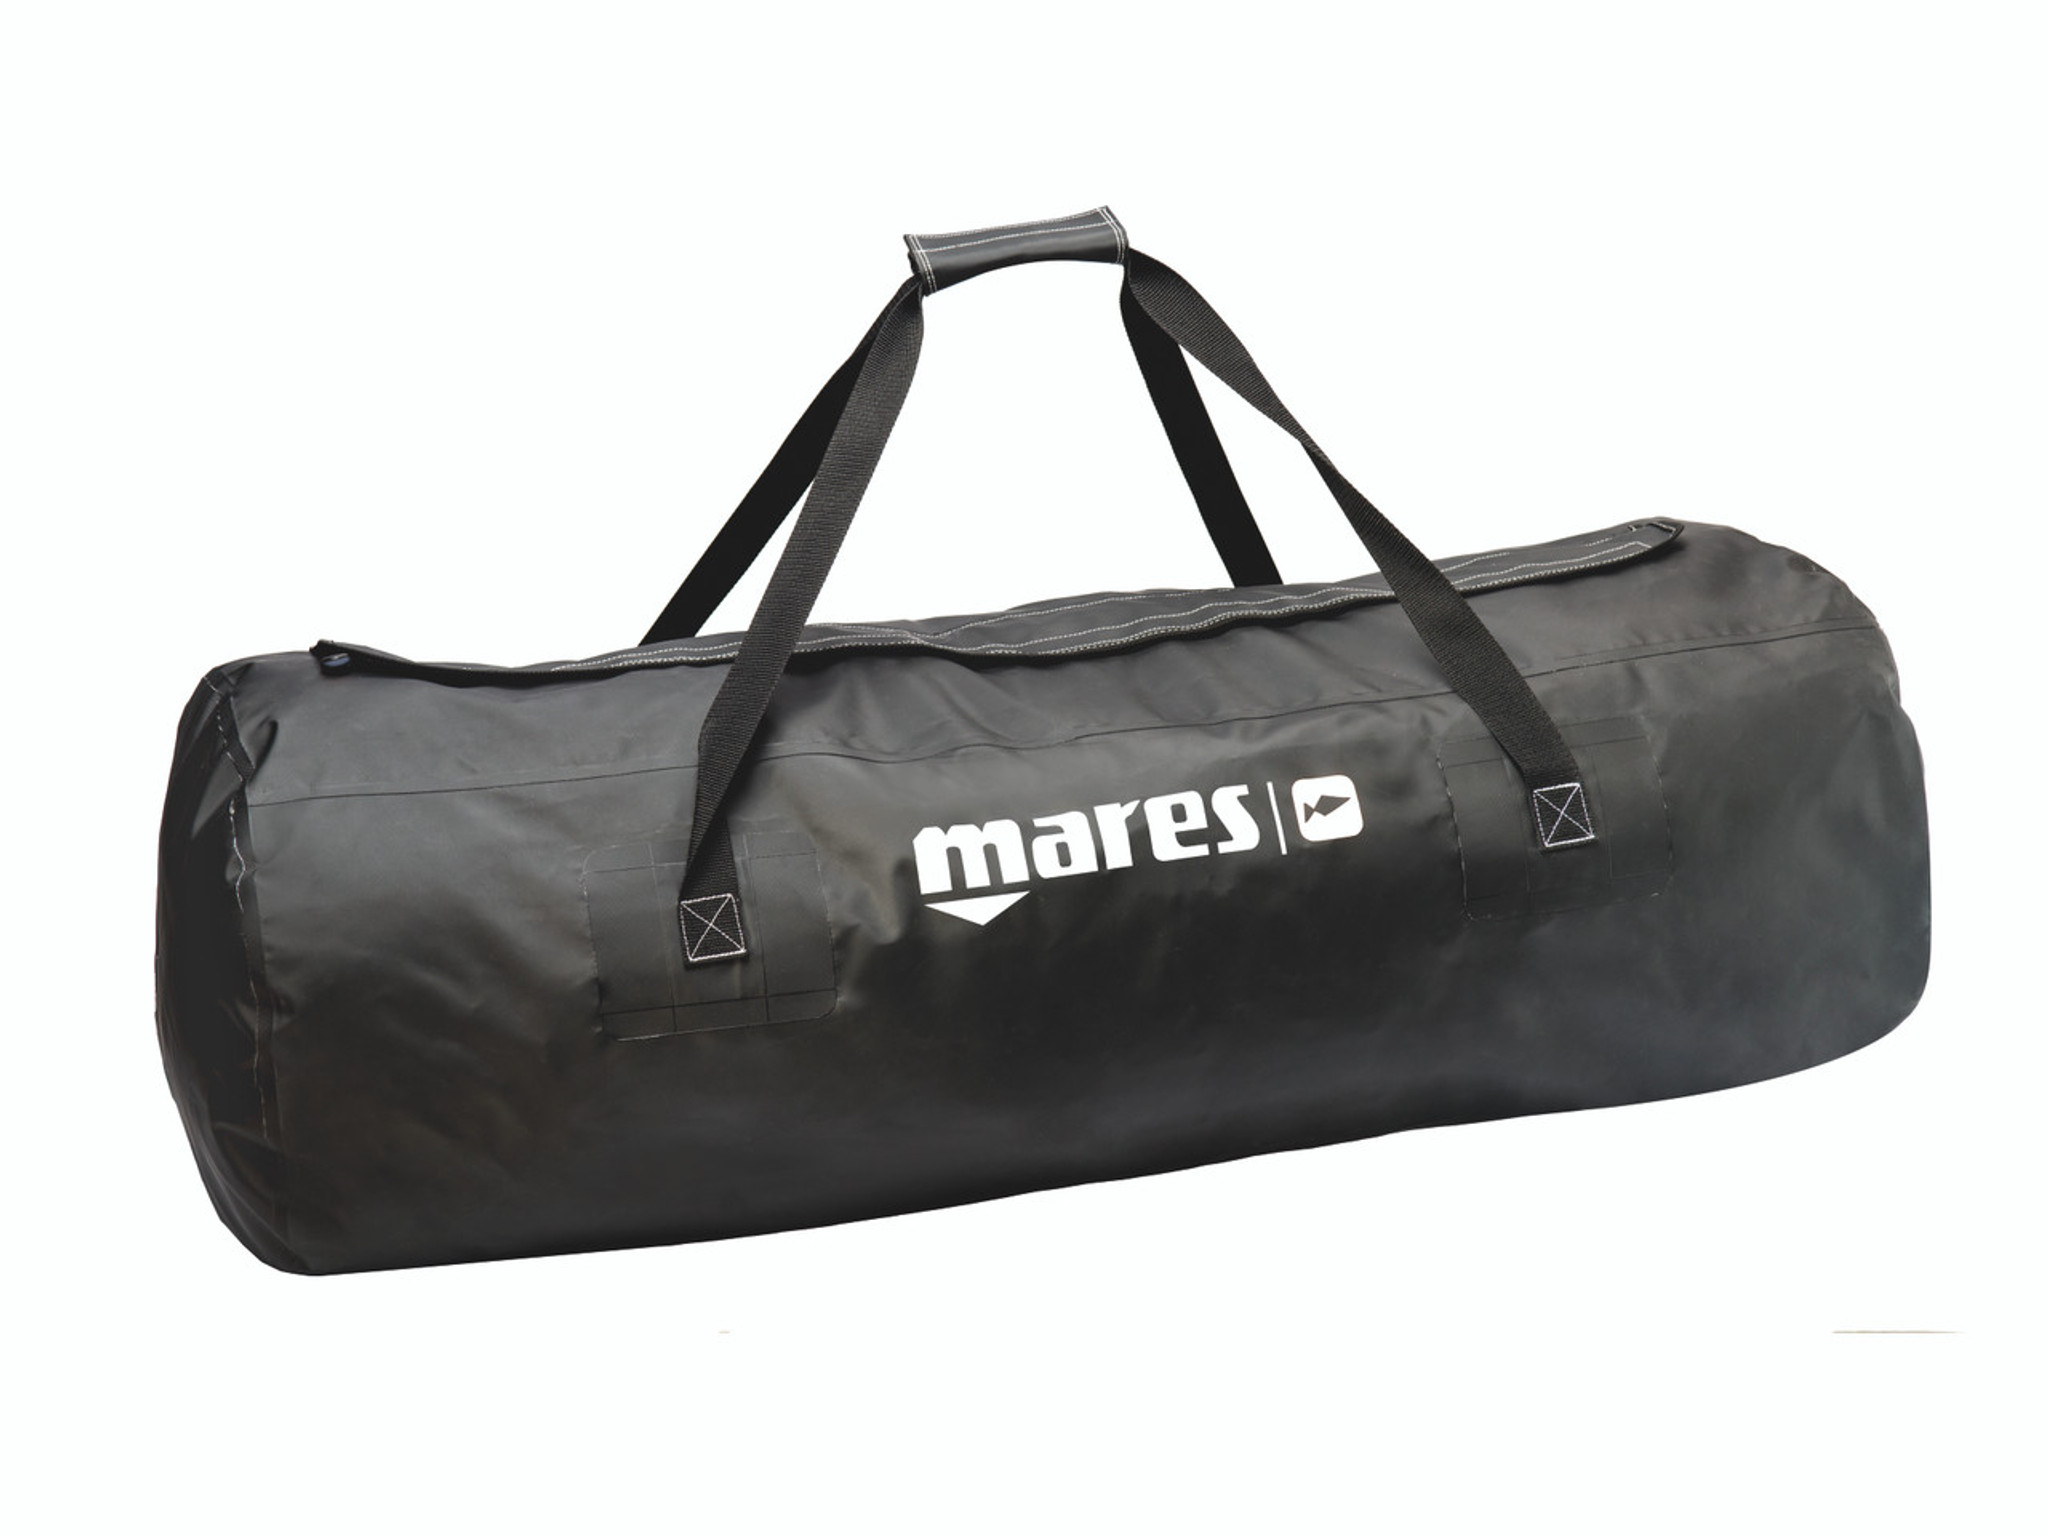 Mares Attack 100 Bag Duffle Gear Spearfishing Bag 425560